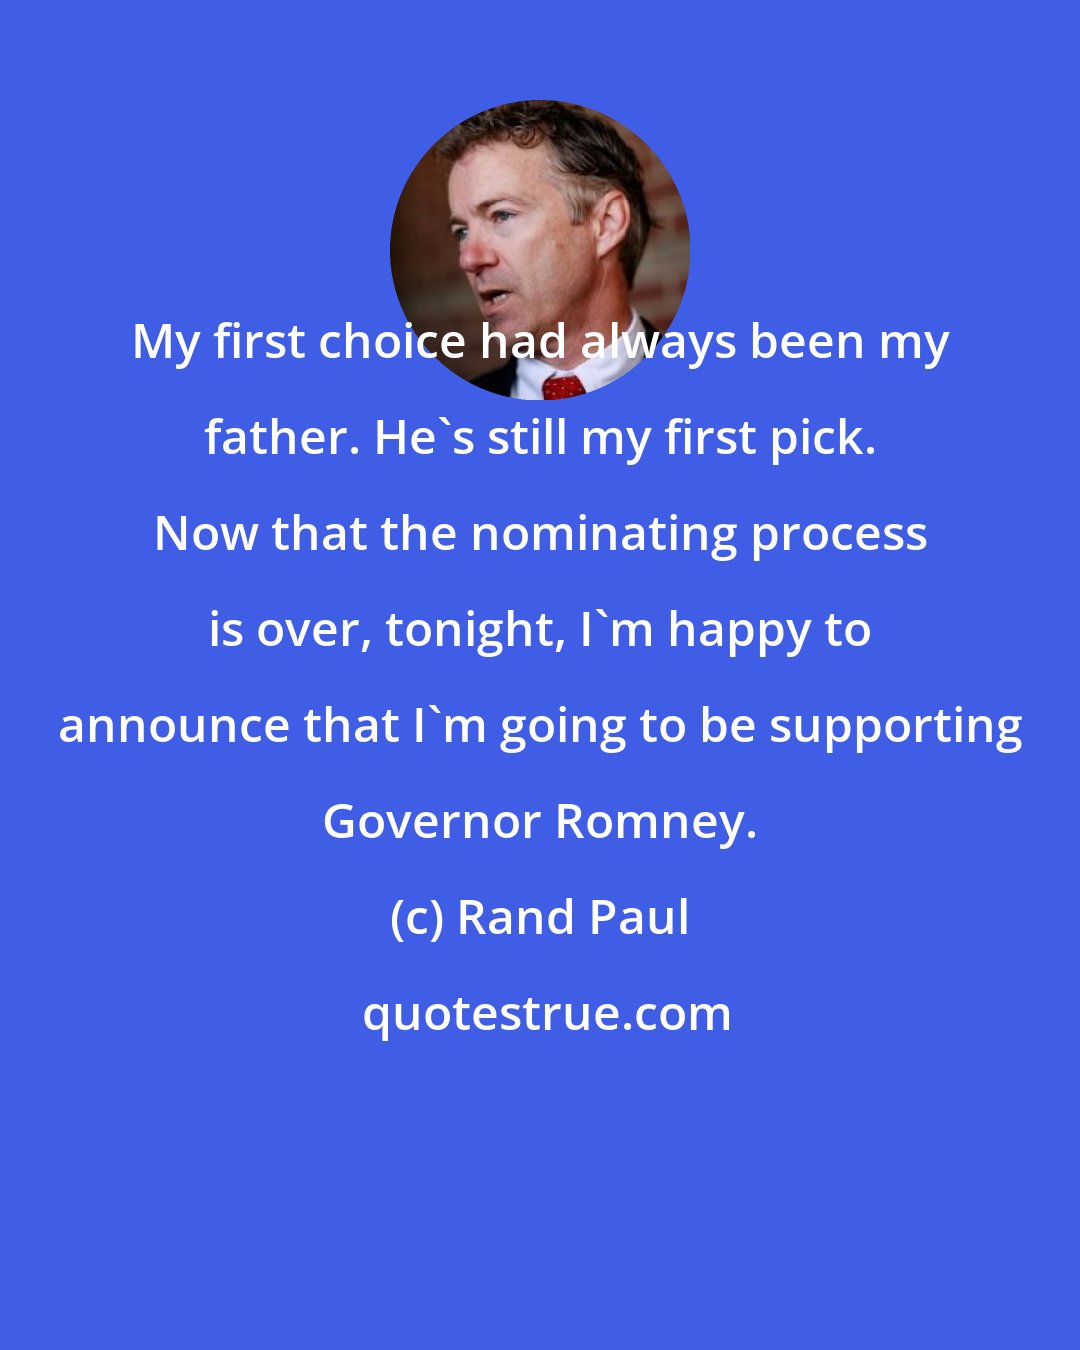 Rand Paul: My first choice had always been my father. He's still my first pick. Now that the nominating process is over, tonight, I'm happy to announce that I'm going to be supporting Governor Romney.